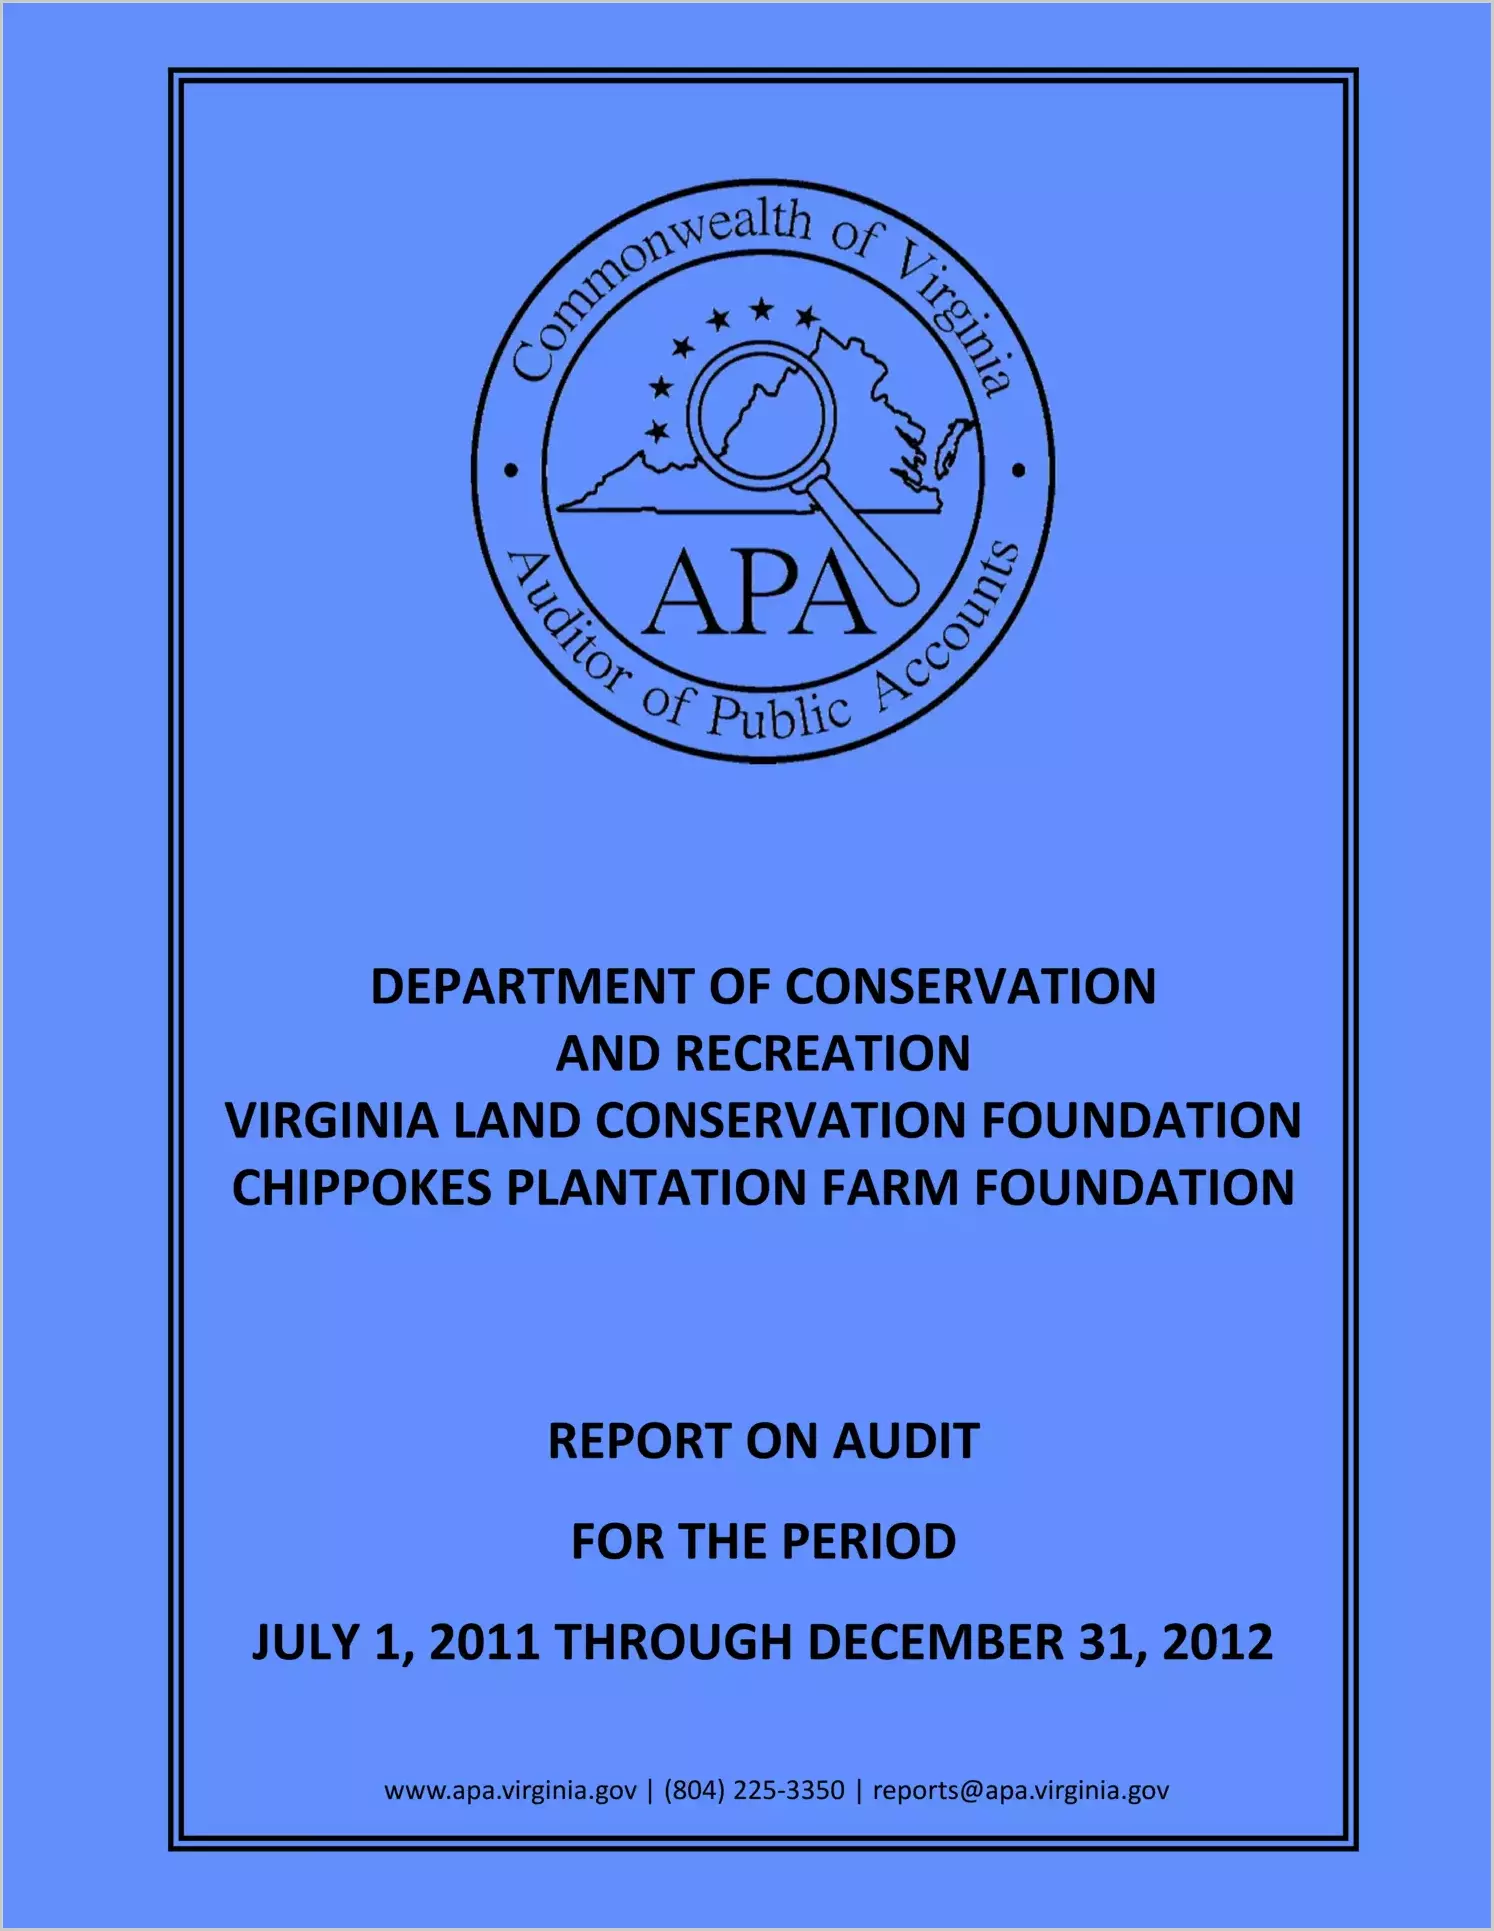 Department of Conservation and Recreation Report on Audit for the Period July 1, 2011 through December 31, 2012